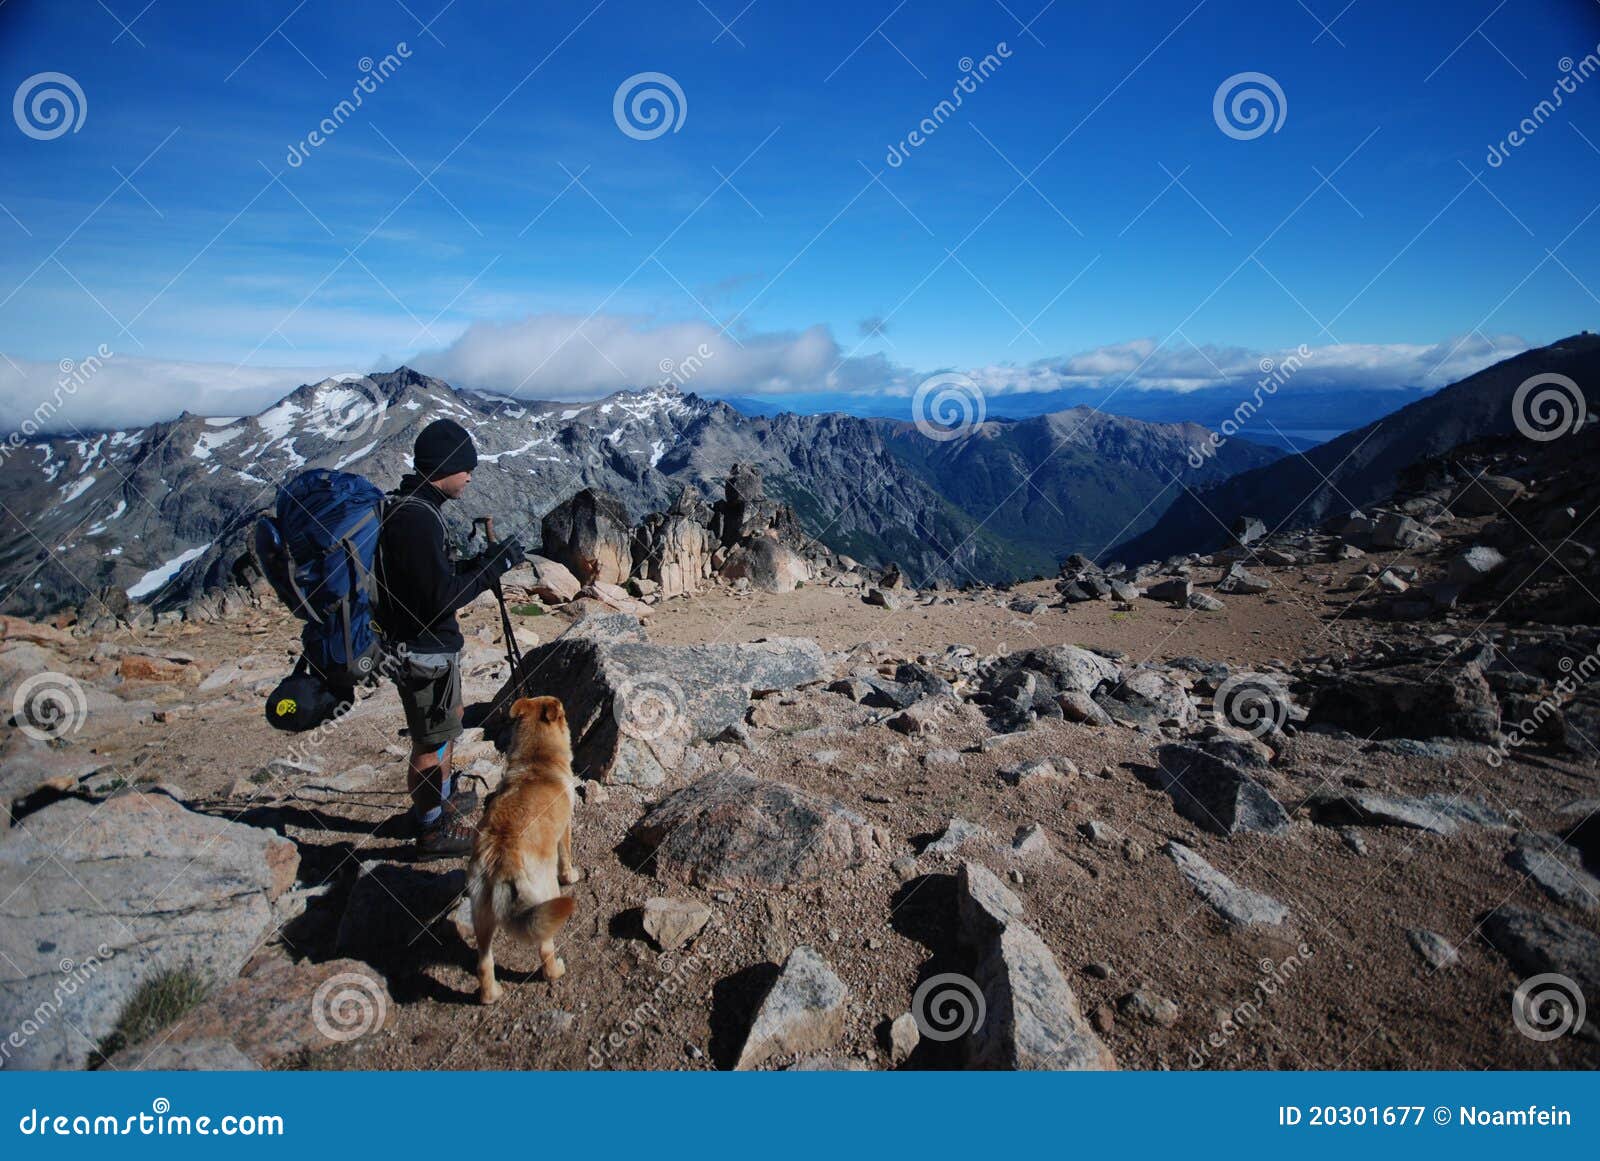 backpacker and a dog in the outdoors